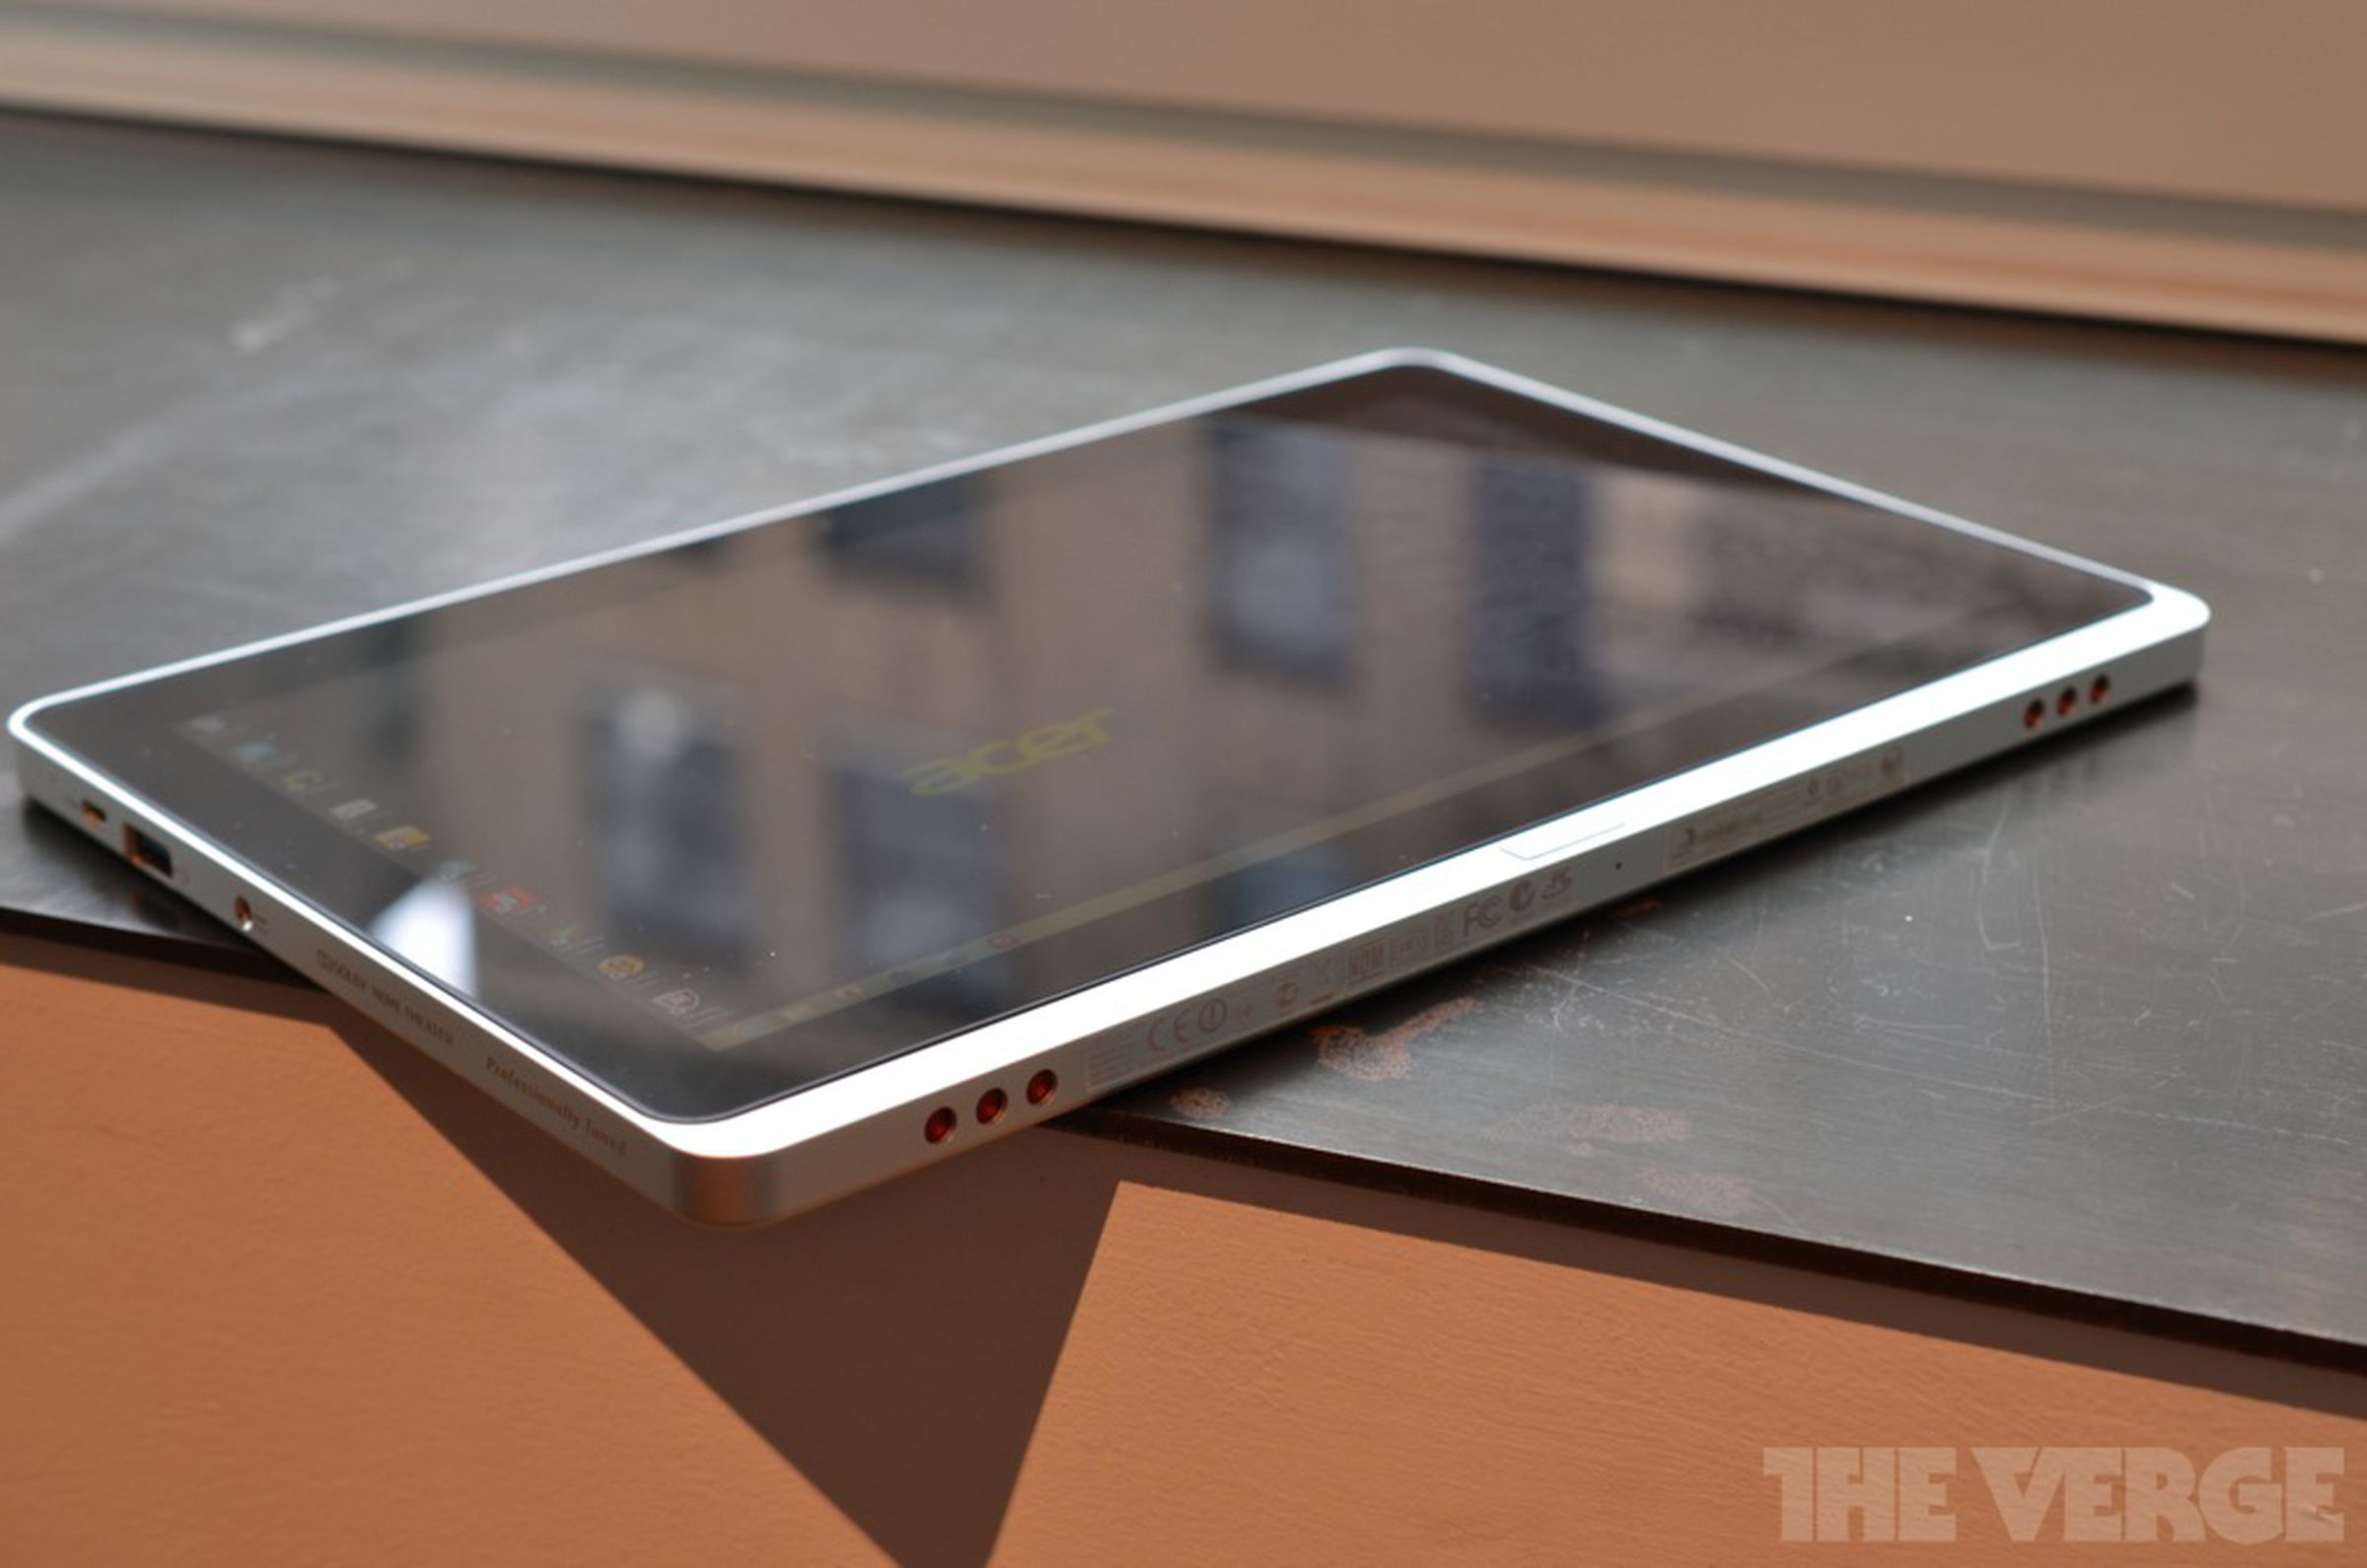 Acer Iconia W700 hands-on photos